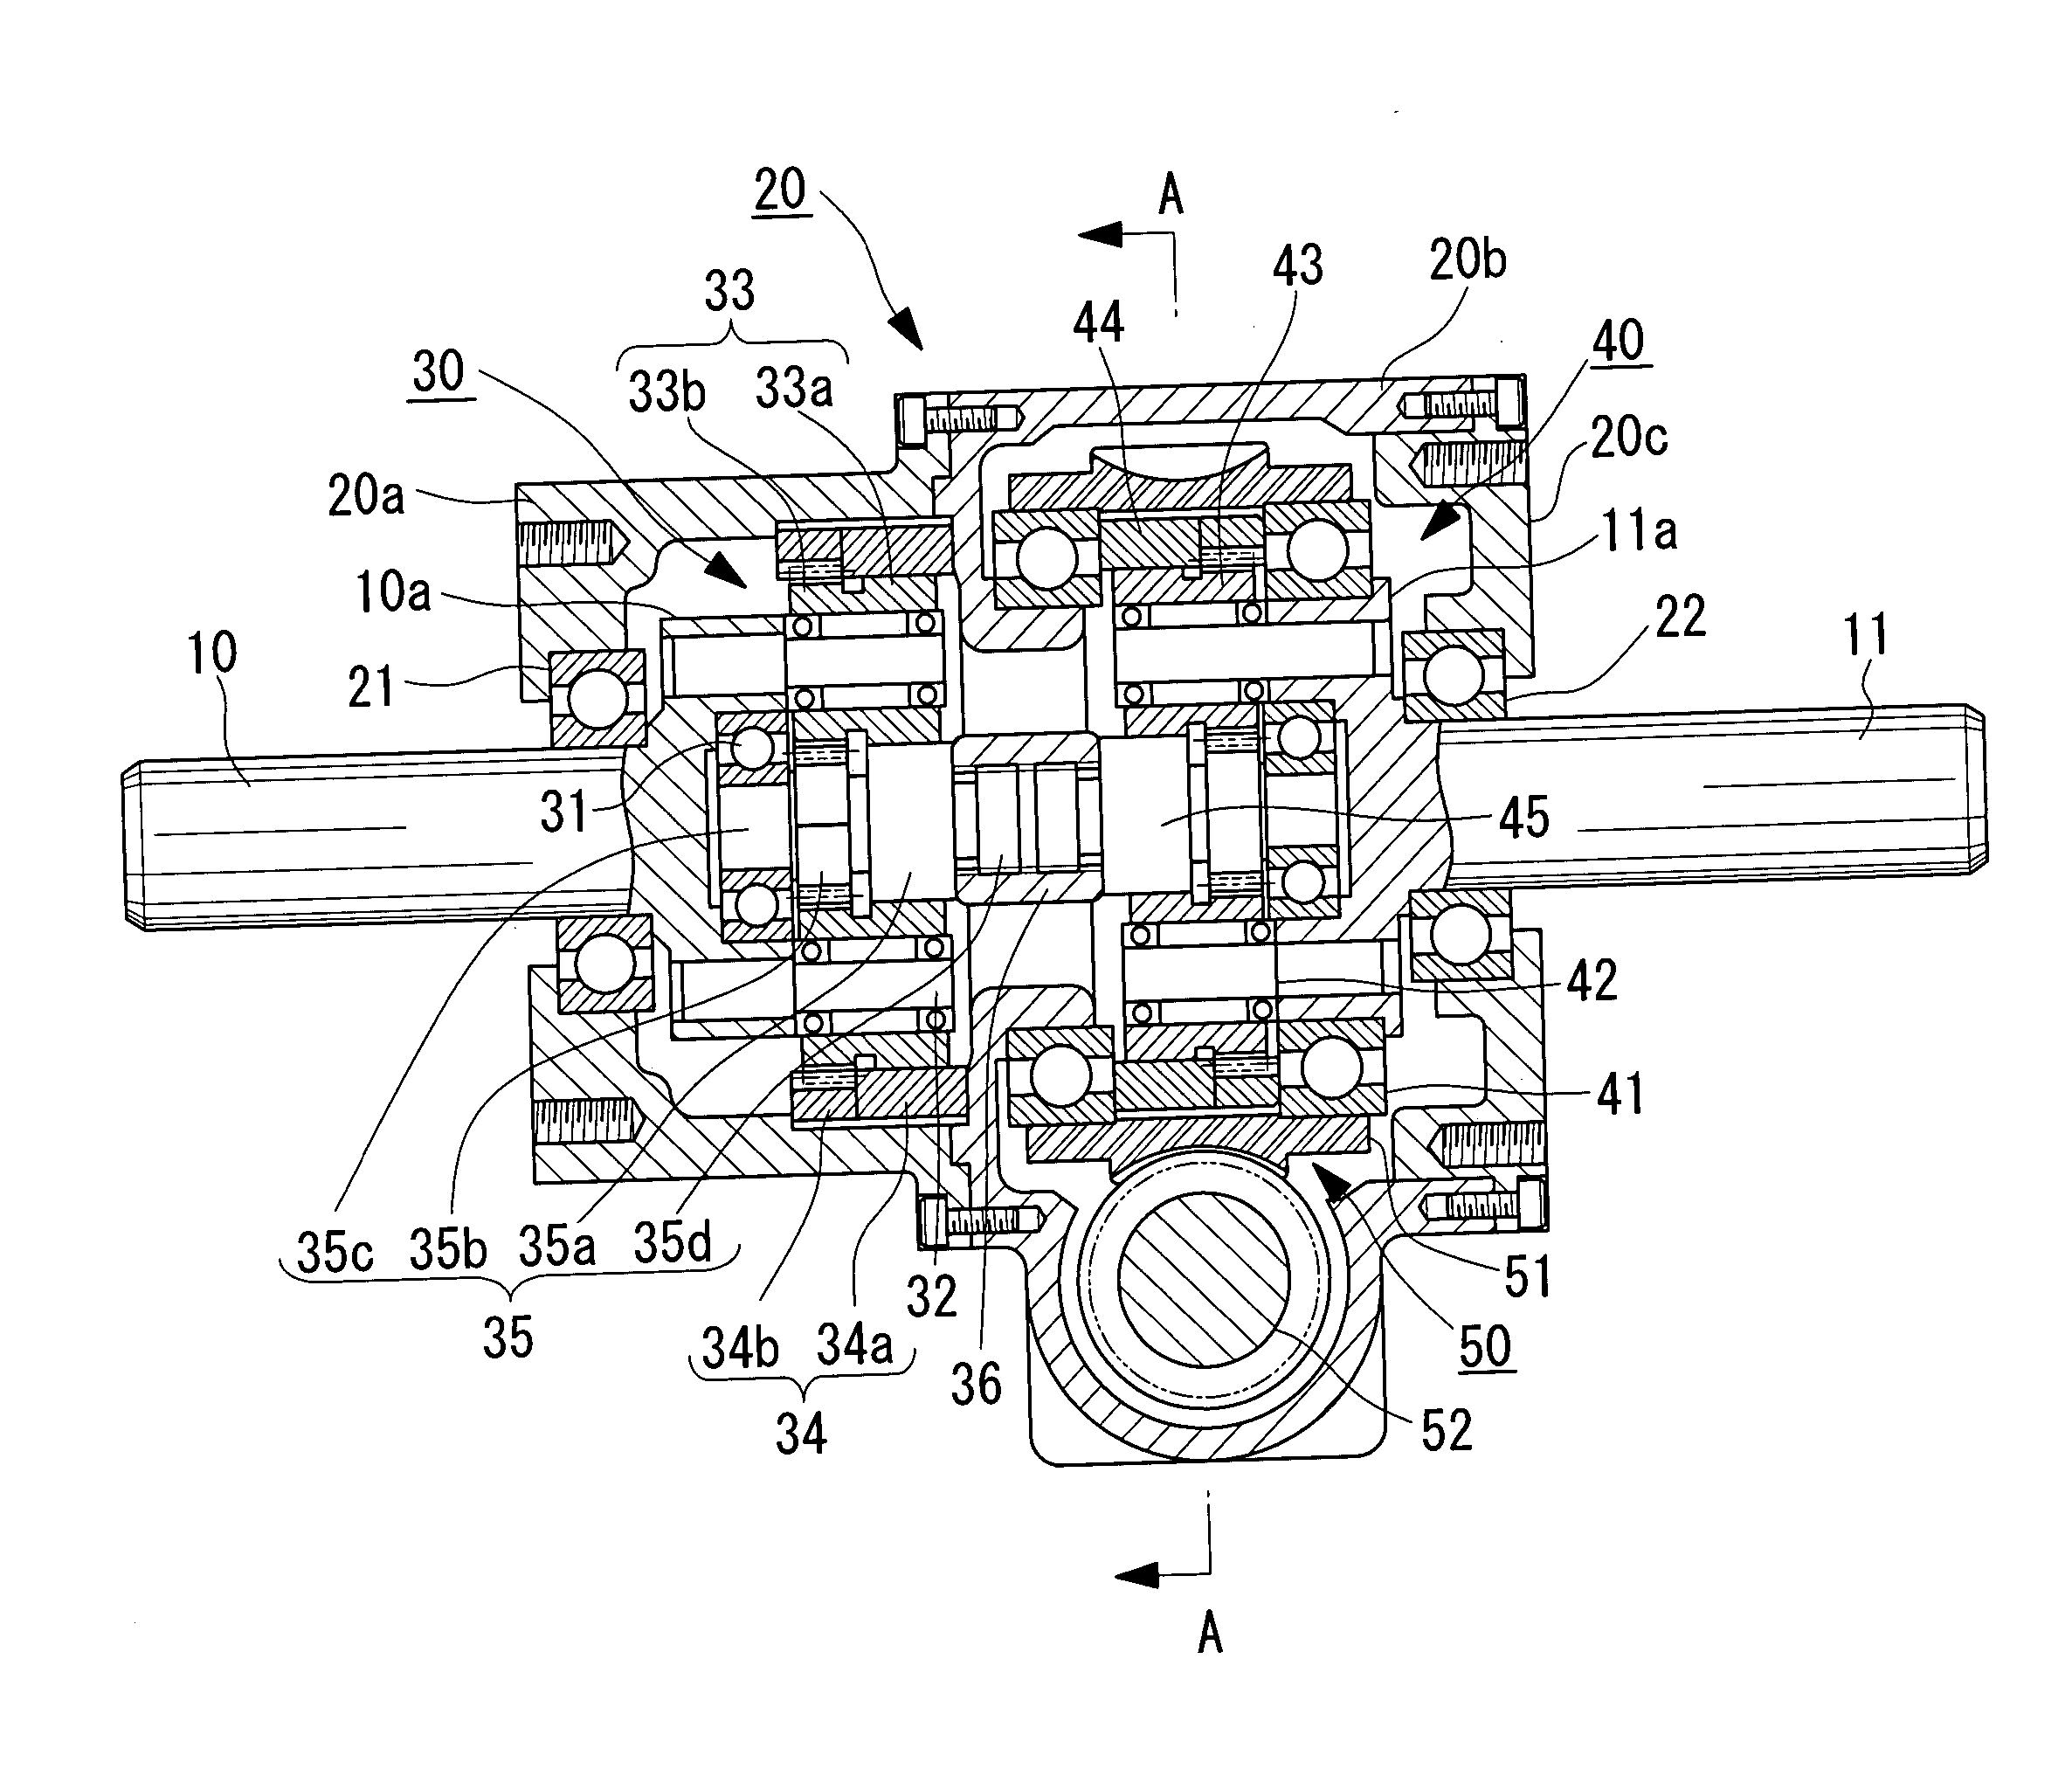 Planetary-roller-type continuously variable transmission